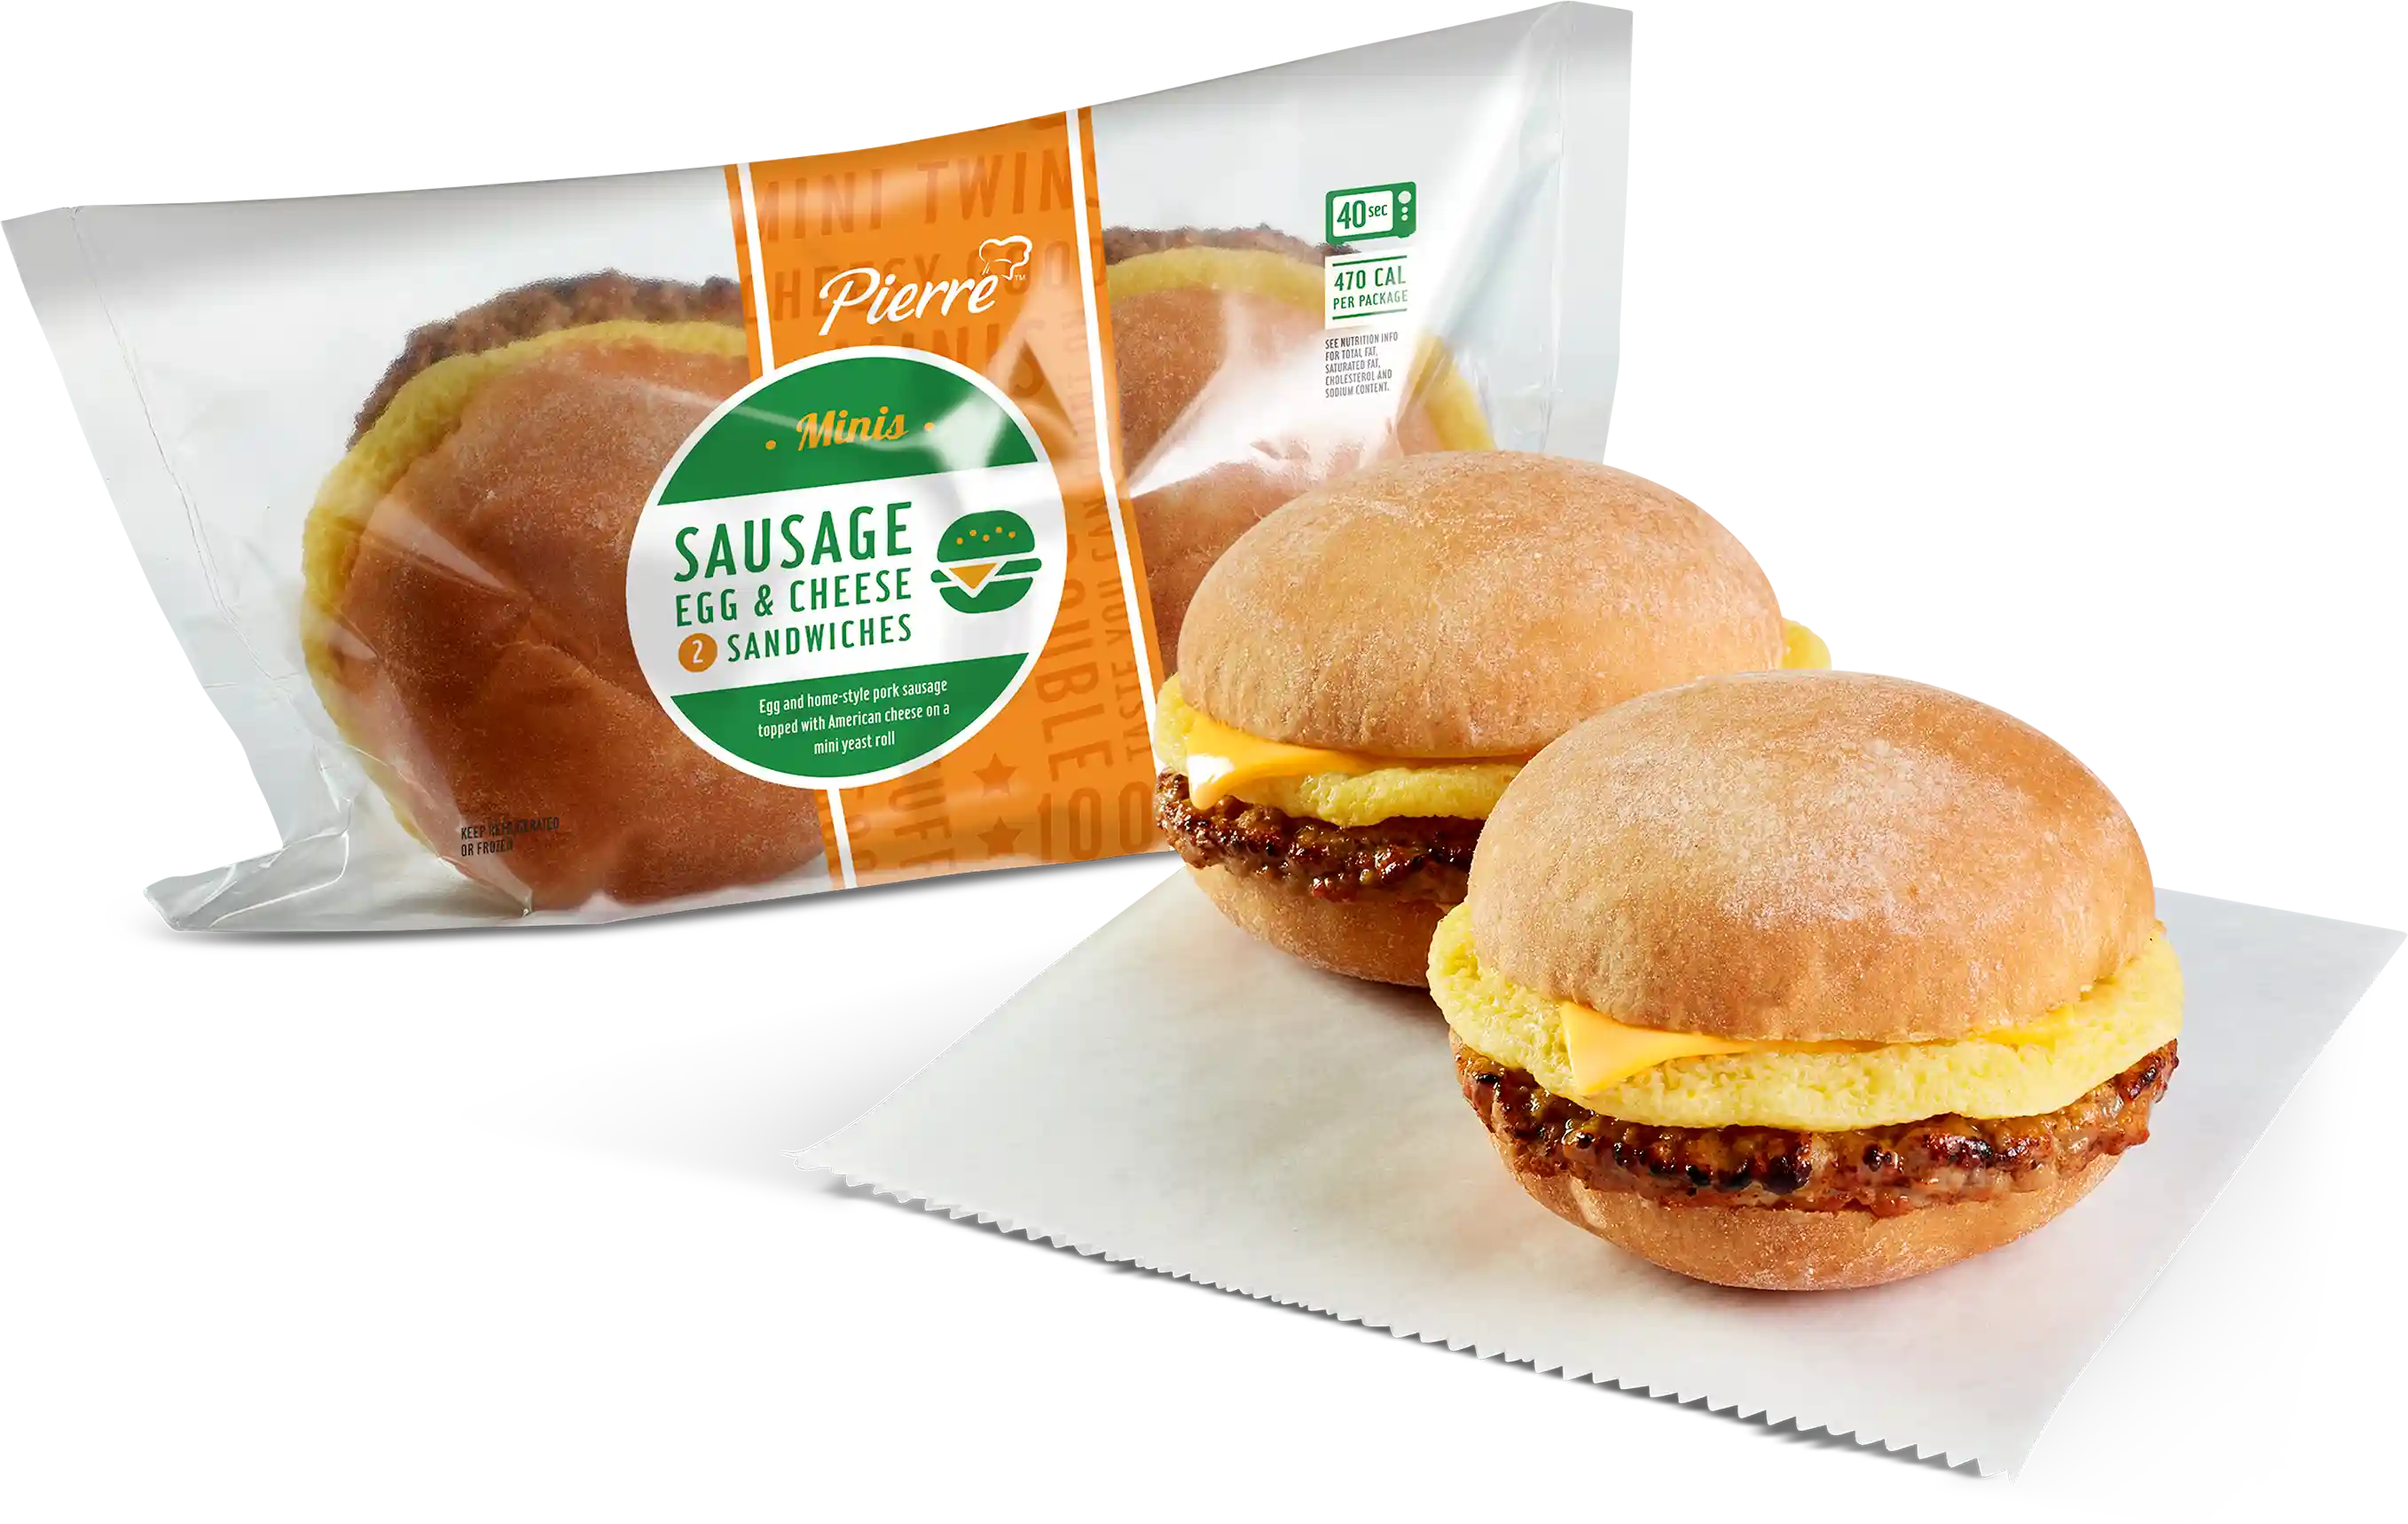 Pierre® Mini Sausage, Egg And Cheese Sandwichhttps://images.salsify.com/image/upload/s--GPDActEy--/q_25/byjy3c8sni9t5x5uuhed.webp